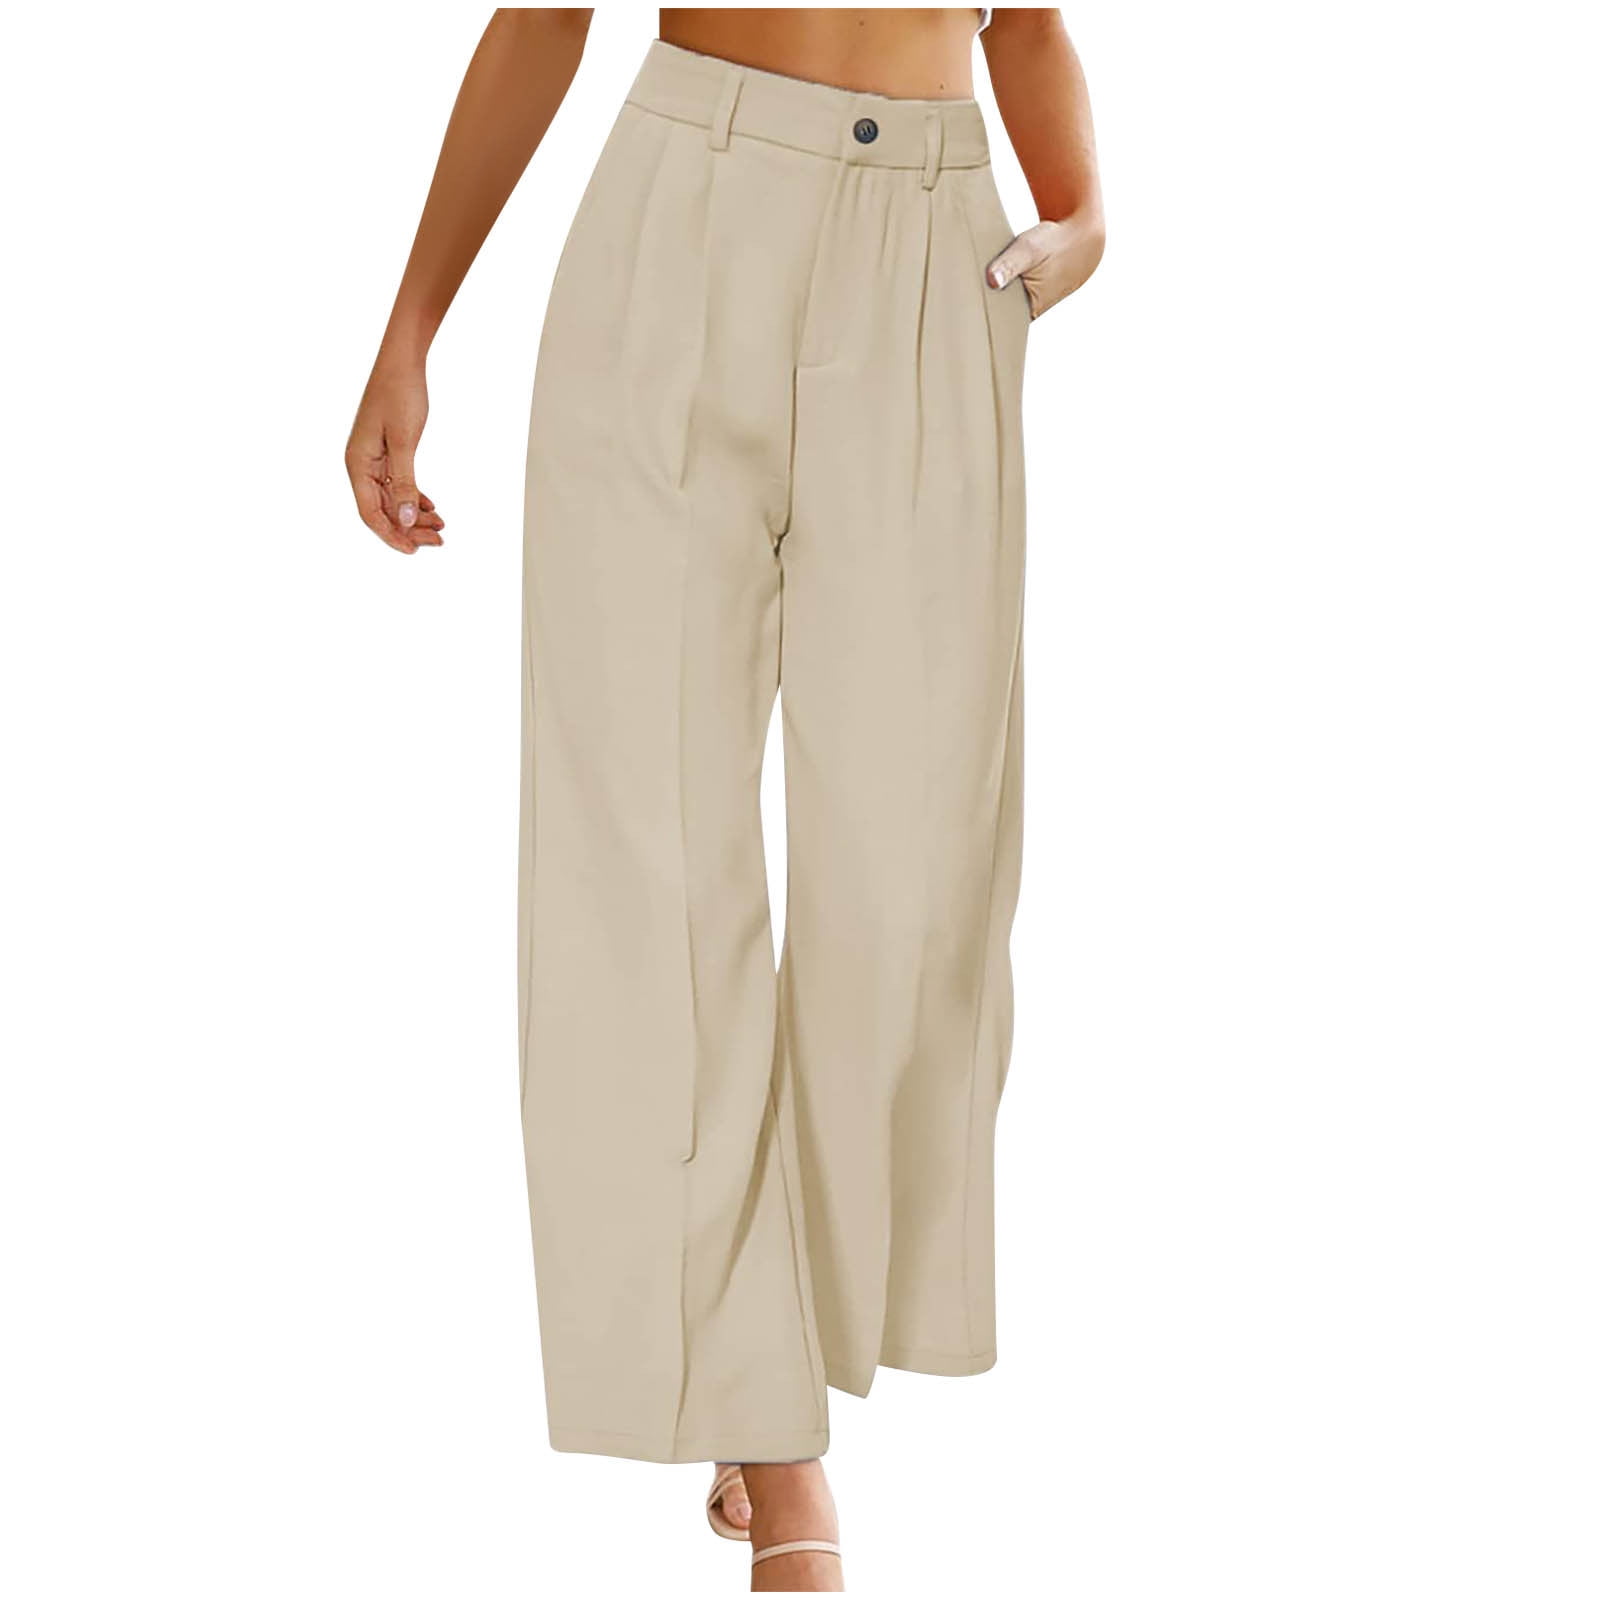 YYDGH Women's Wide Leg Pants Pleated High Waisted Button Down Straight Long  Trousers Business Office Work Suit Pants Beige Beige